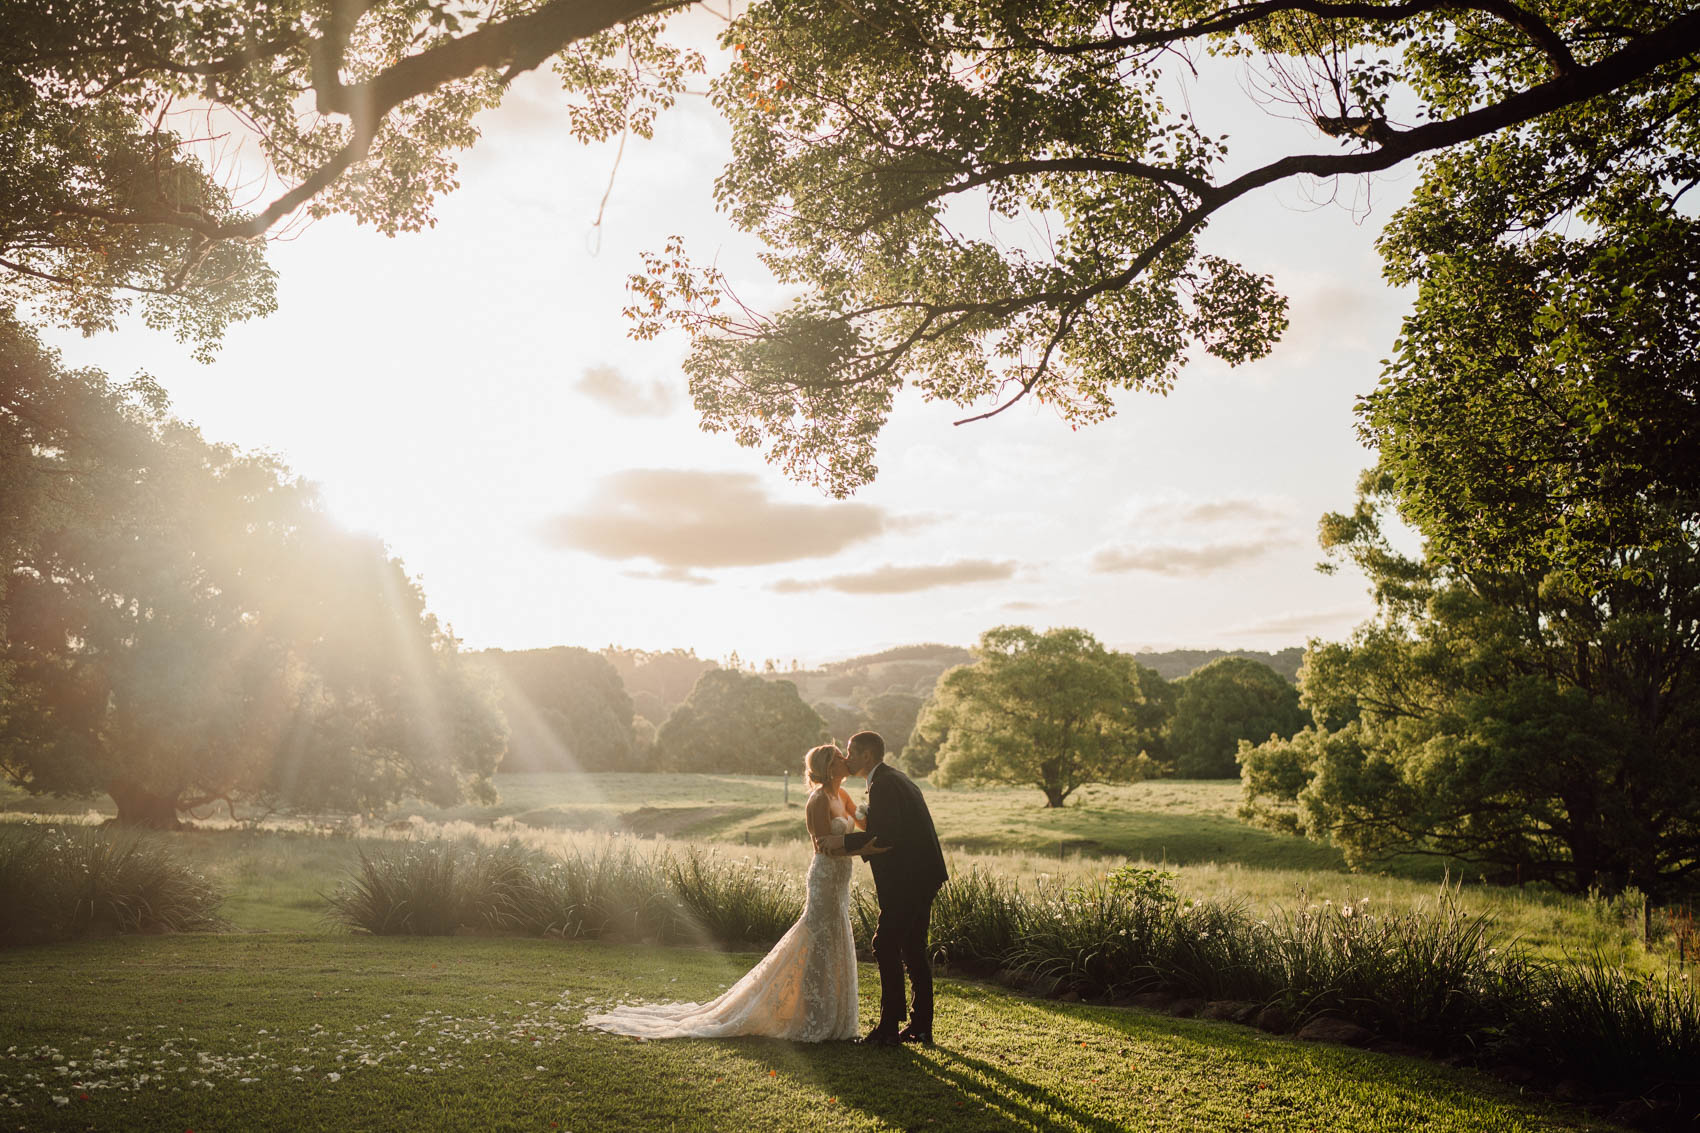 Bride and groom kissing under a tree at sunset at a Frida's Field wedding